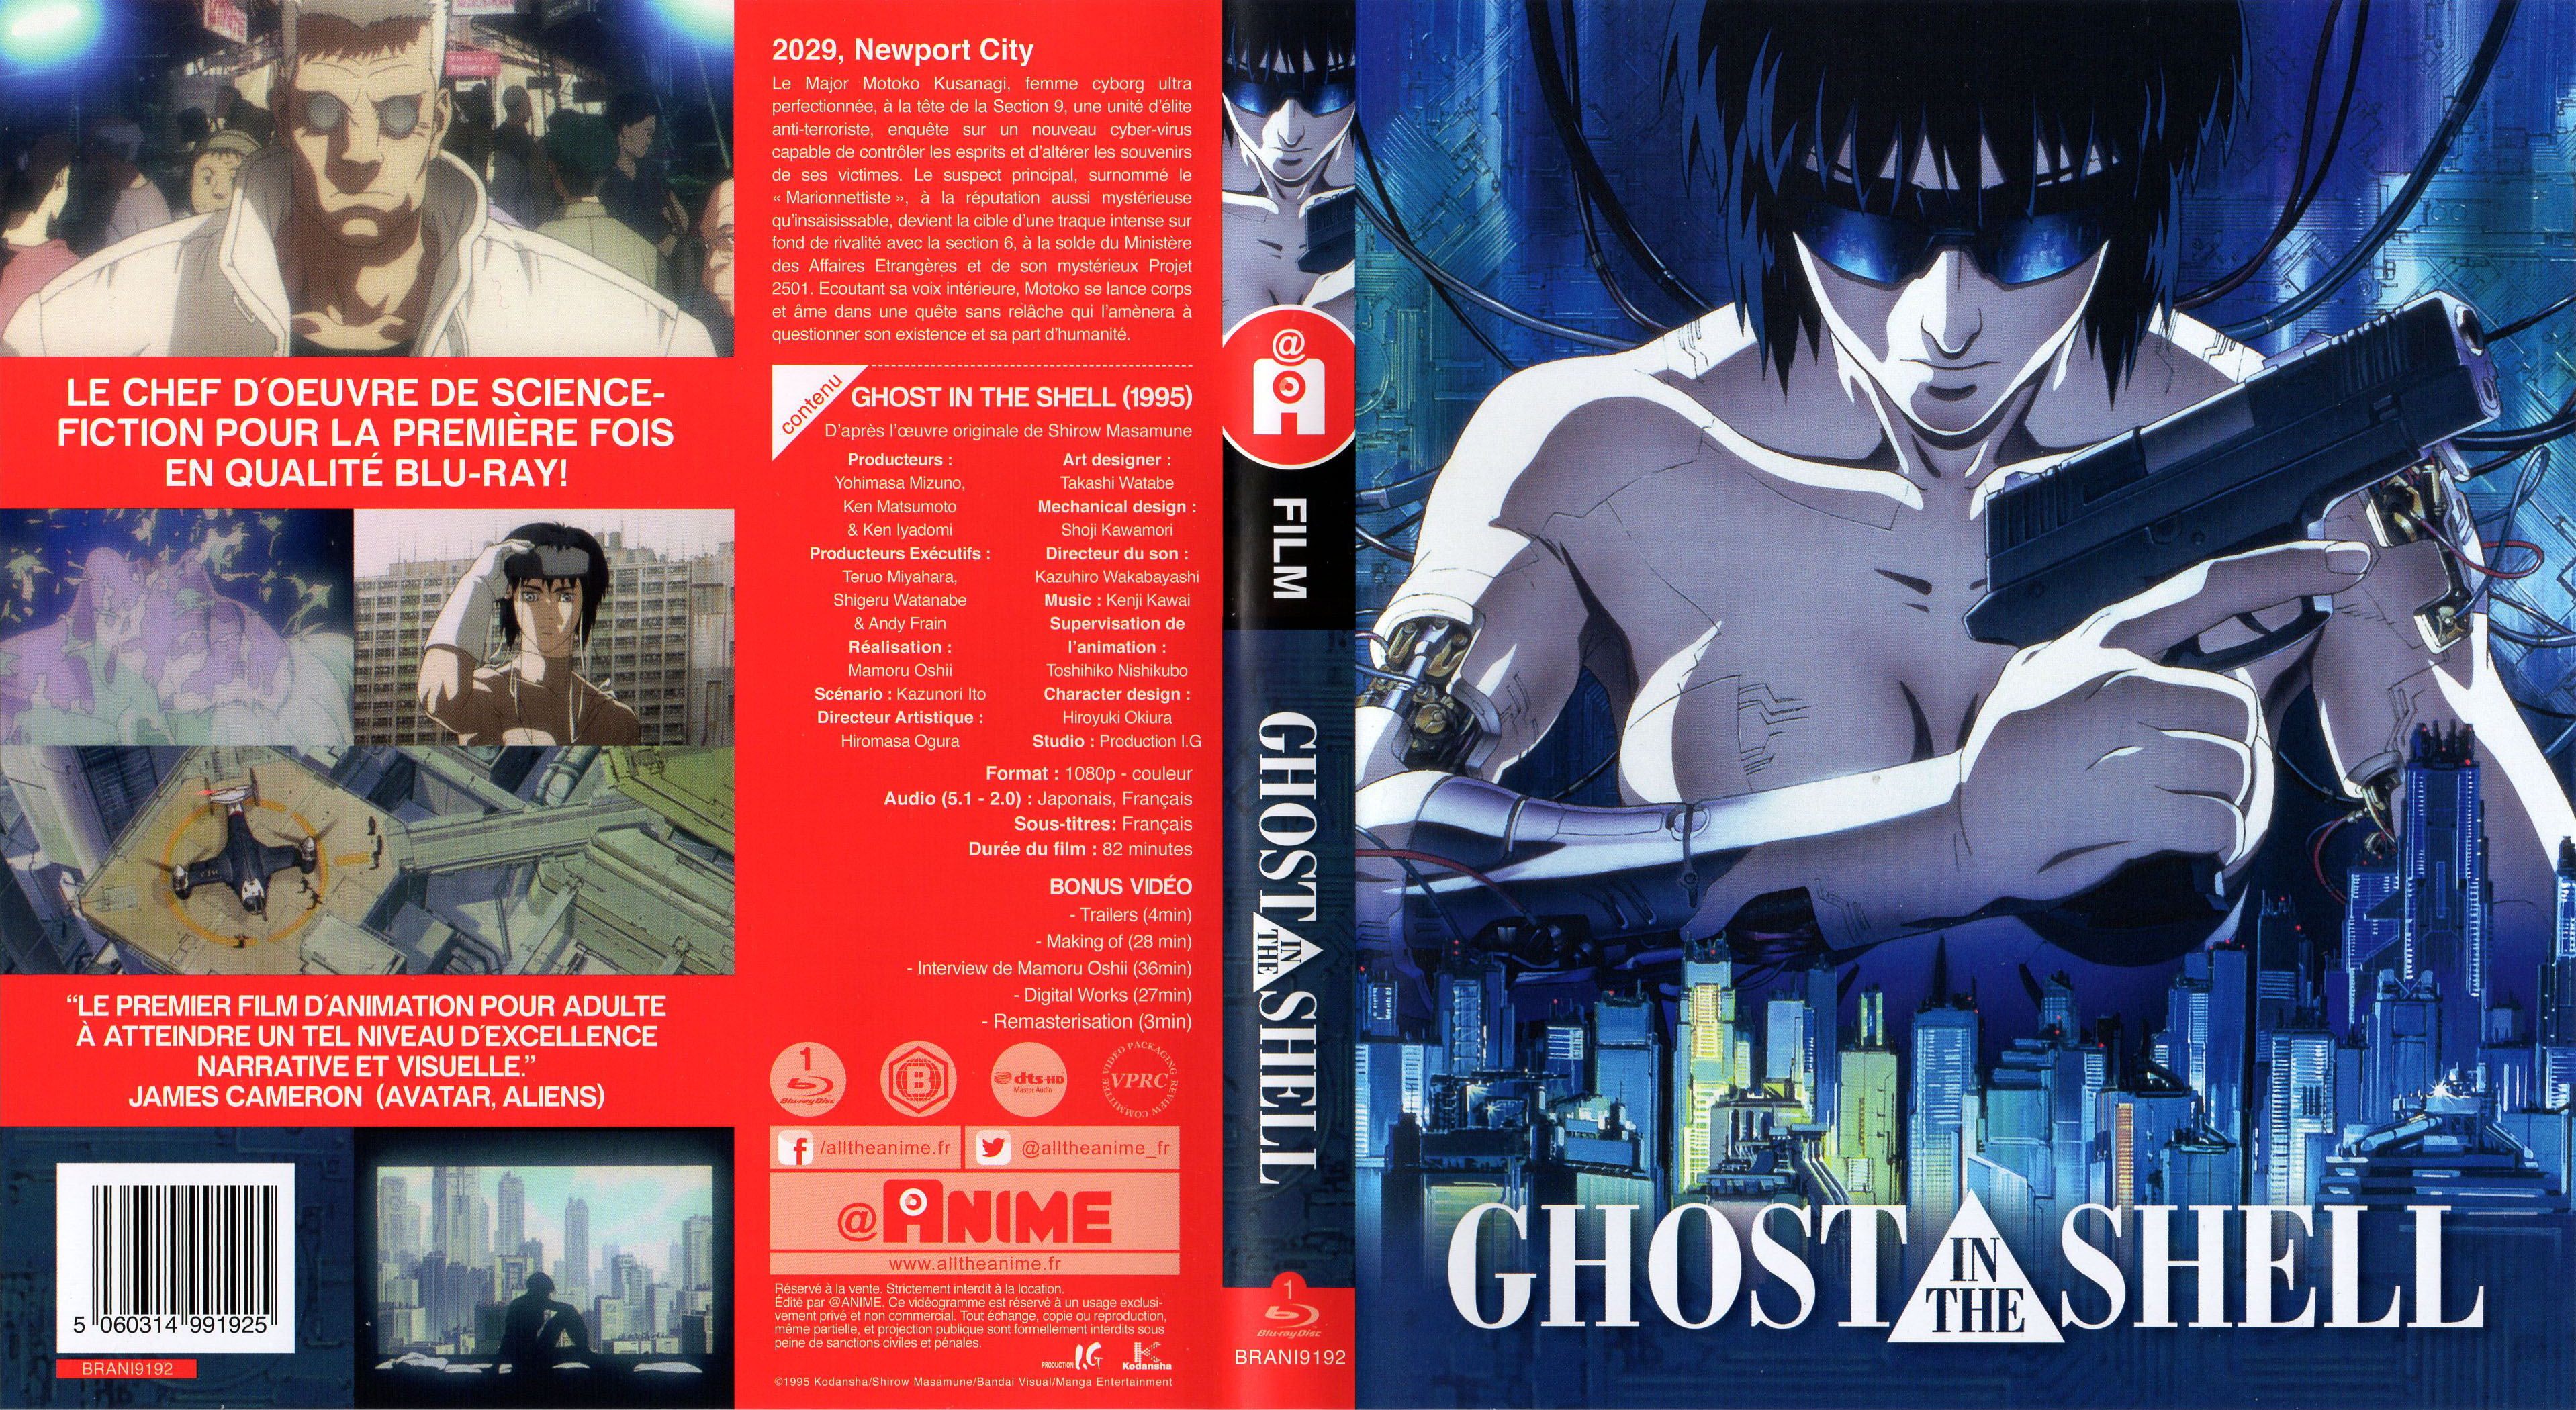 Jaquette DVD Ghost in the shell (BLU-RAY)